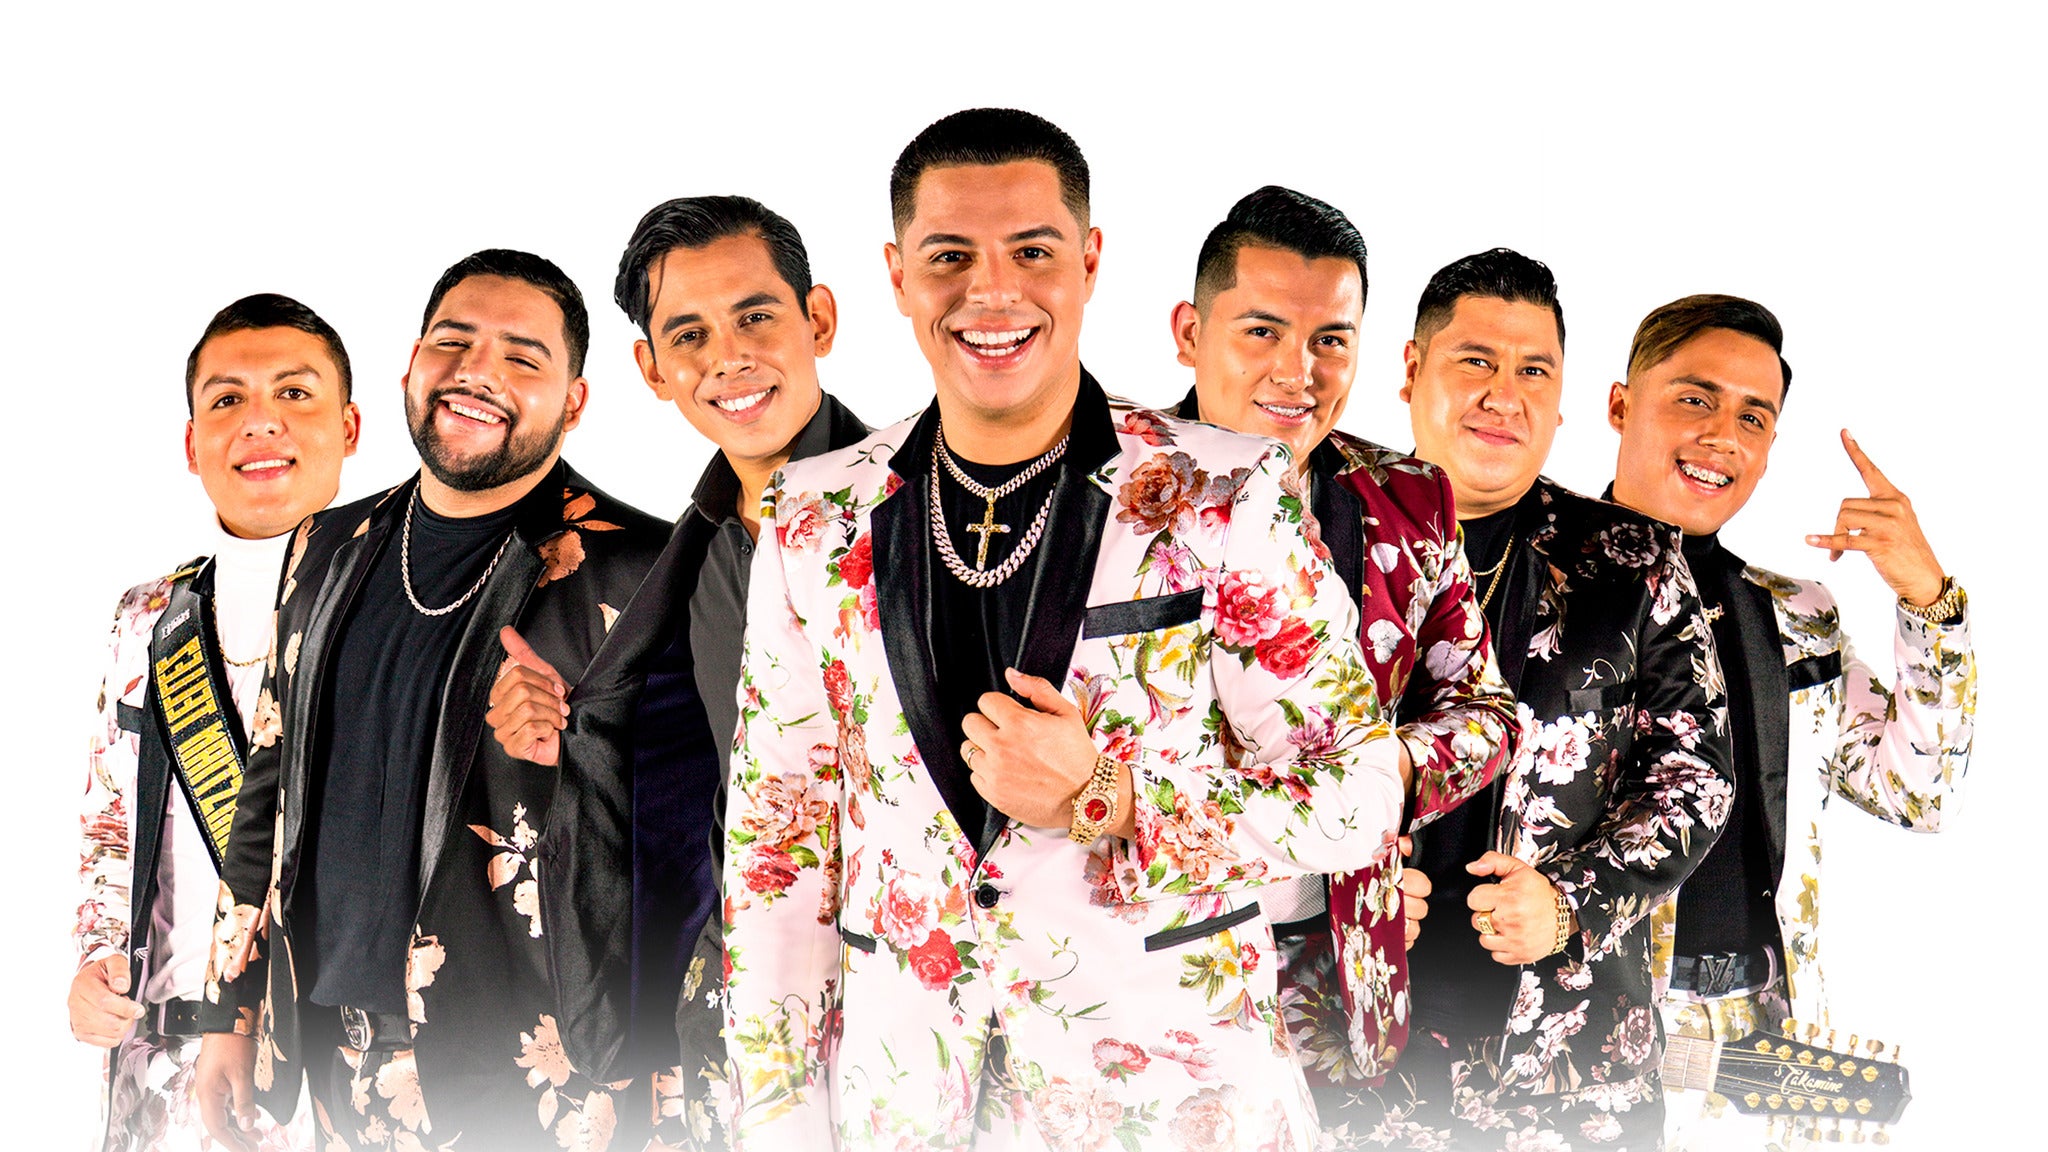 Grupo Firme presale code for early tickets in Miami